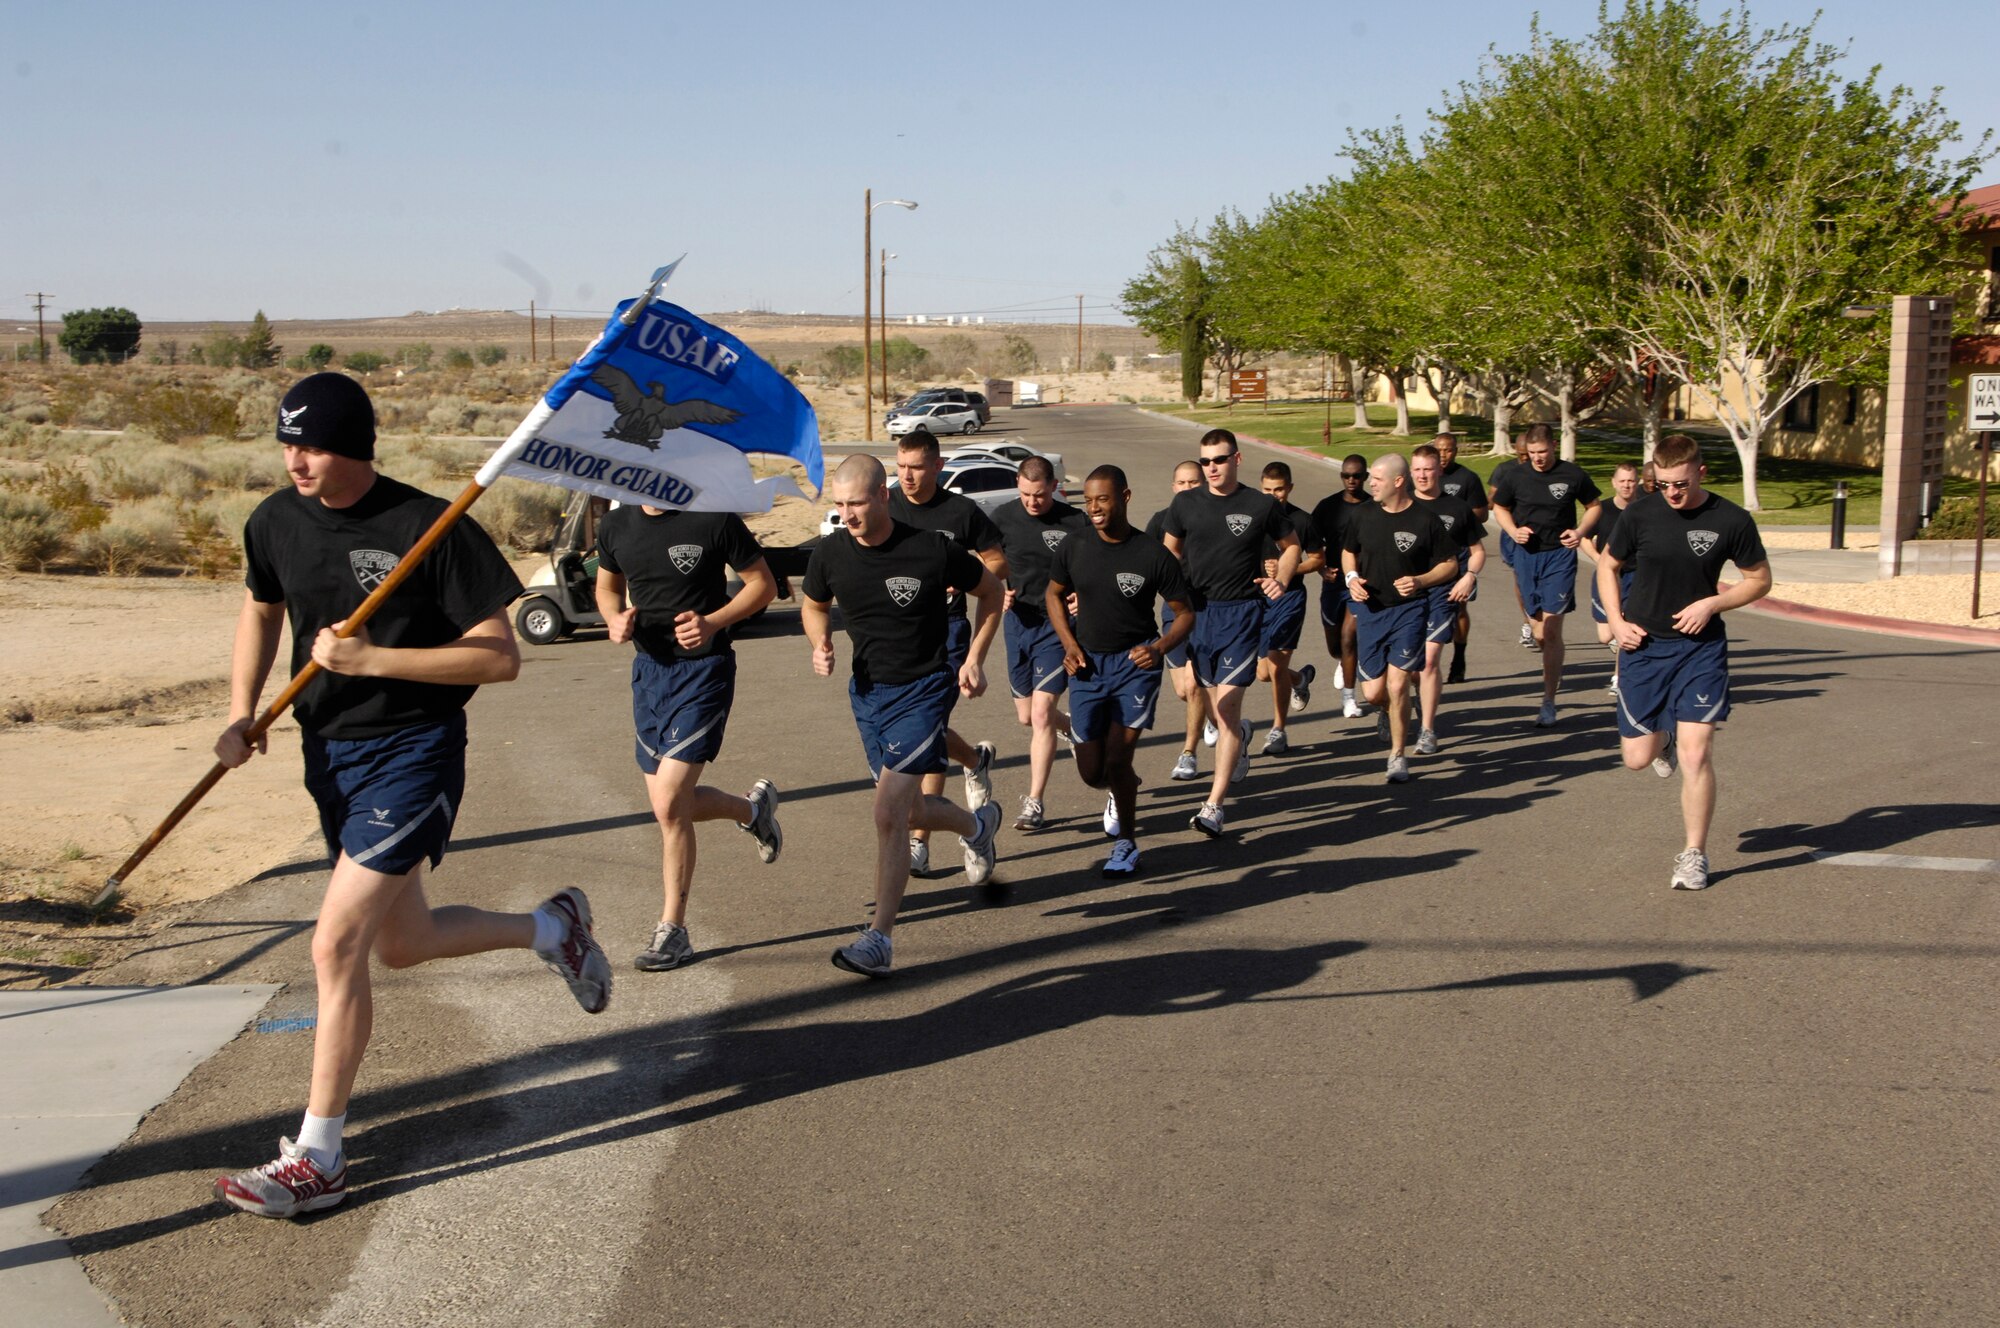 Members of the Air Force Honor Guard Drill Team, with guidon in hand, take off for a formation run while visiting at Edwards AFB, Calif. on 18 April 2007.  The Drill Team is the traveling component of the Air Force Honor Guard and tours Air Force bases world wide showcasing the precision of today's Air Force to recruit, retain, and inspire Airmen for the Air Force mission. (U.S. Air Force photo by Senior Airman Daniel R. DeCook)(Released)